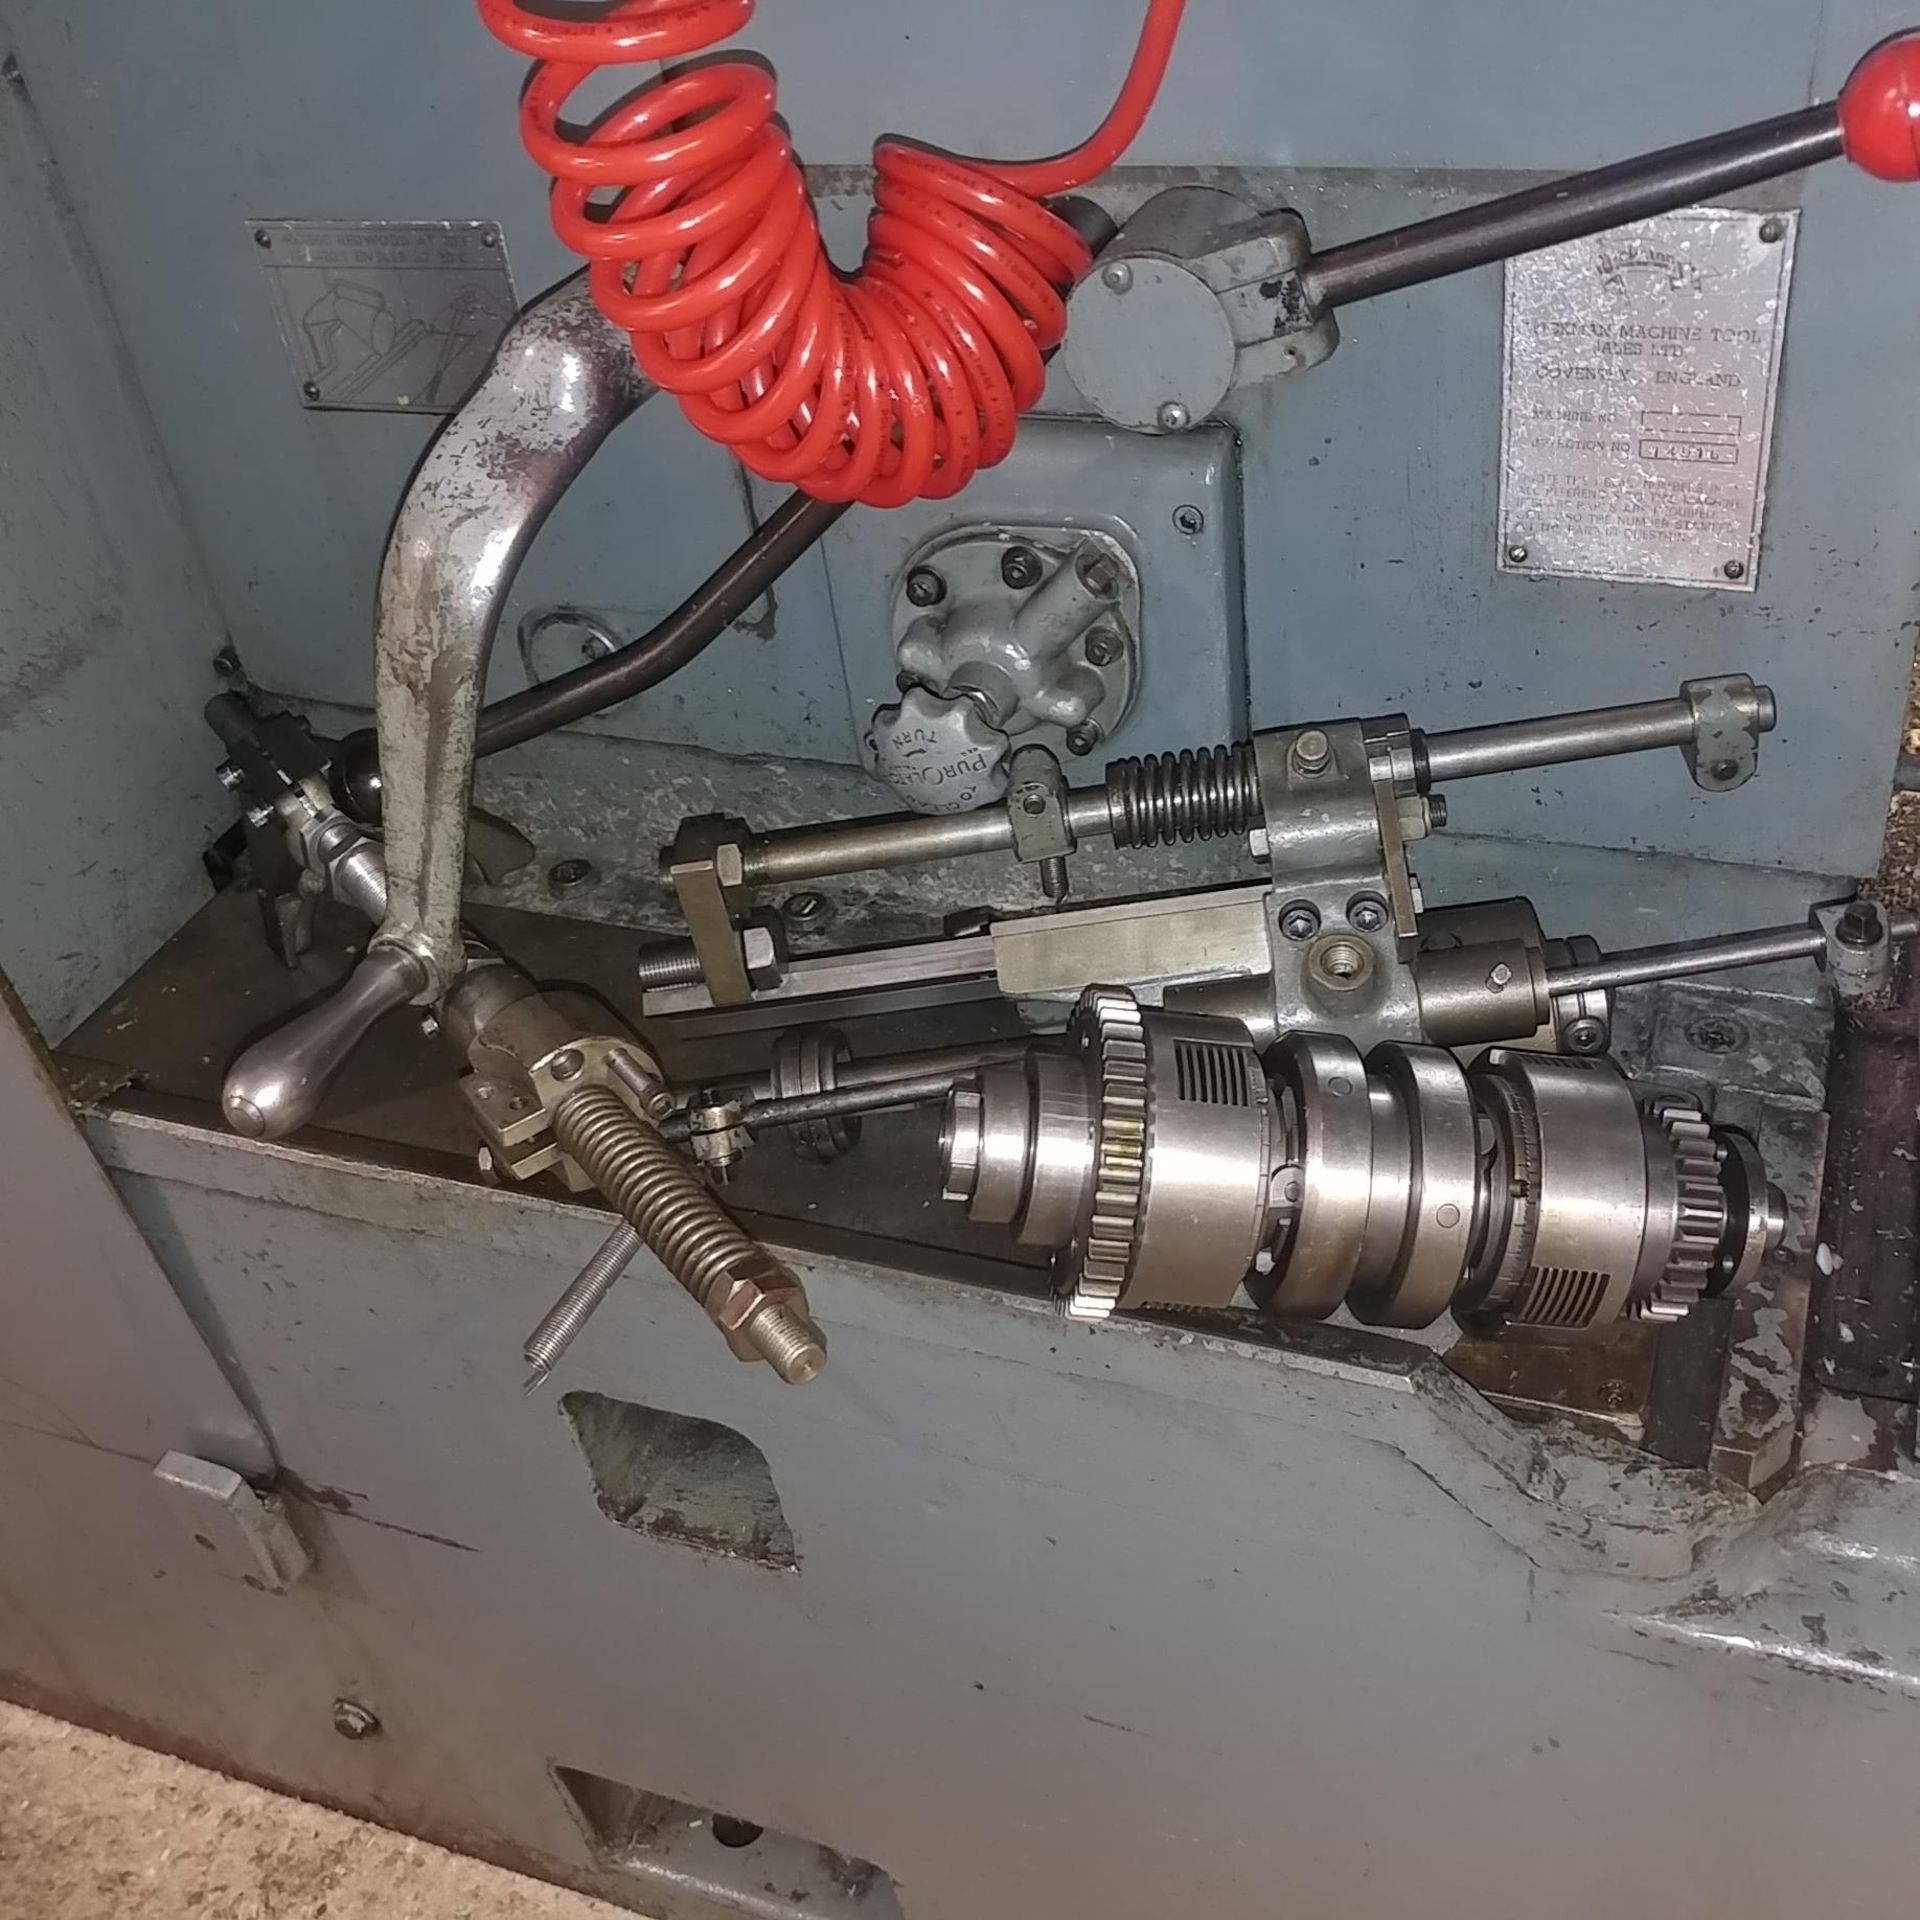 WICKMAN 6 SPINDLE AUTOMATIC SCREW MACHINE, 1", INSPECTION 14916. LOT TO INCLUDE: ASSOCIATED - Image 2 of 9